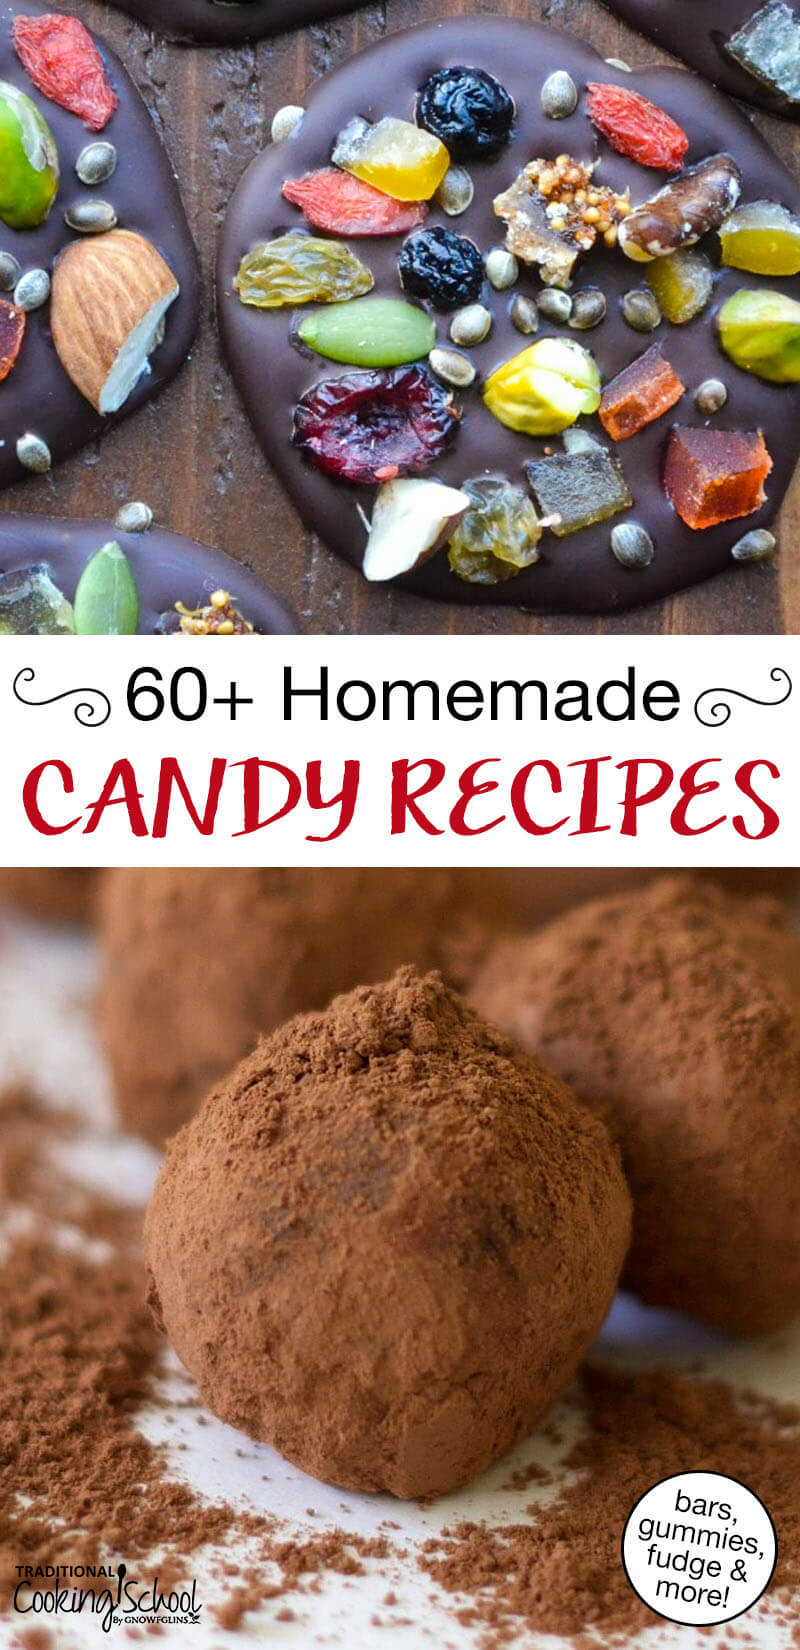 Photo collage of homemade candies including cocoa-dusted truffles. Text overlay says: "60+ Homemade Candy Recipes (bars, gummies, fudge & more!)"